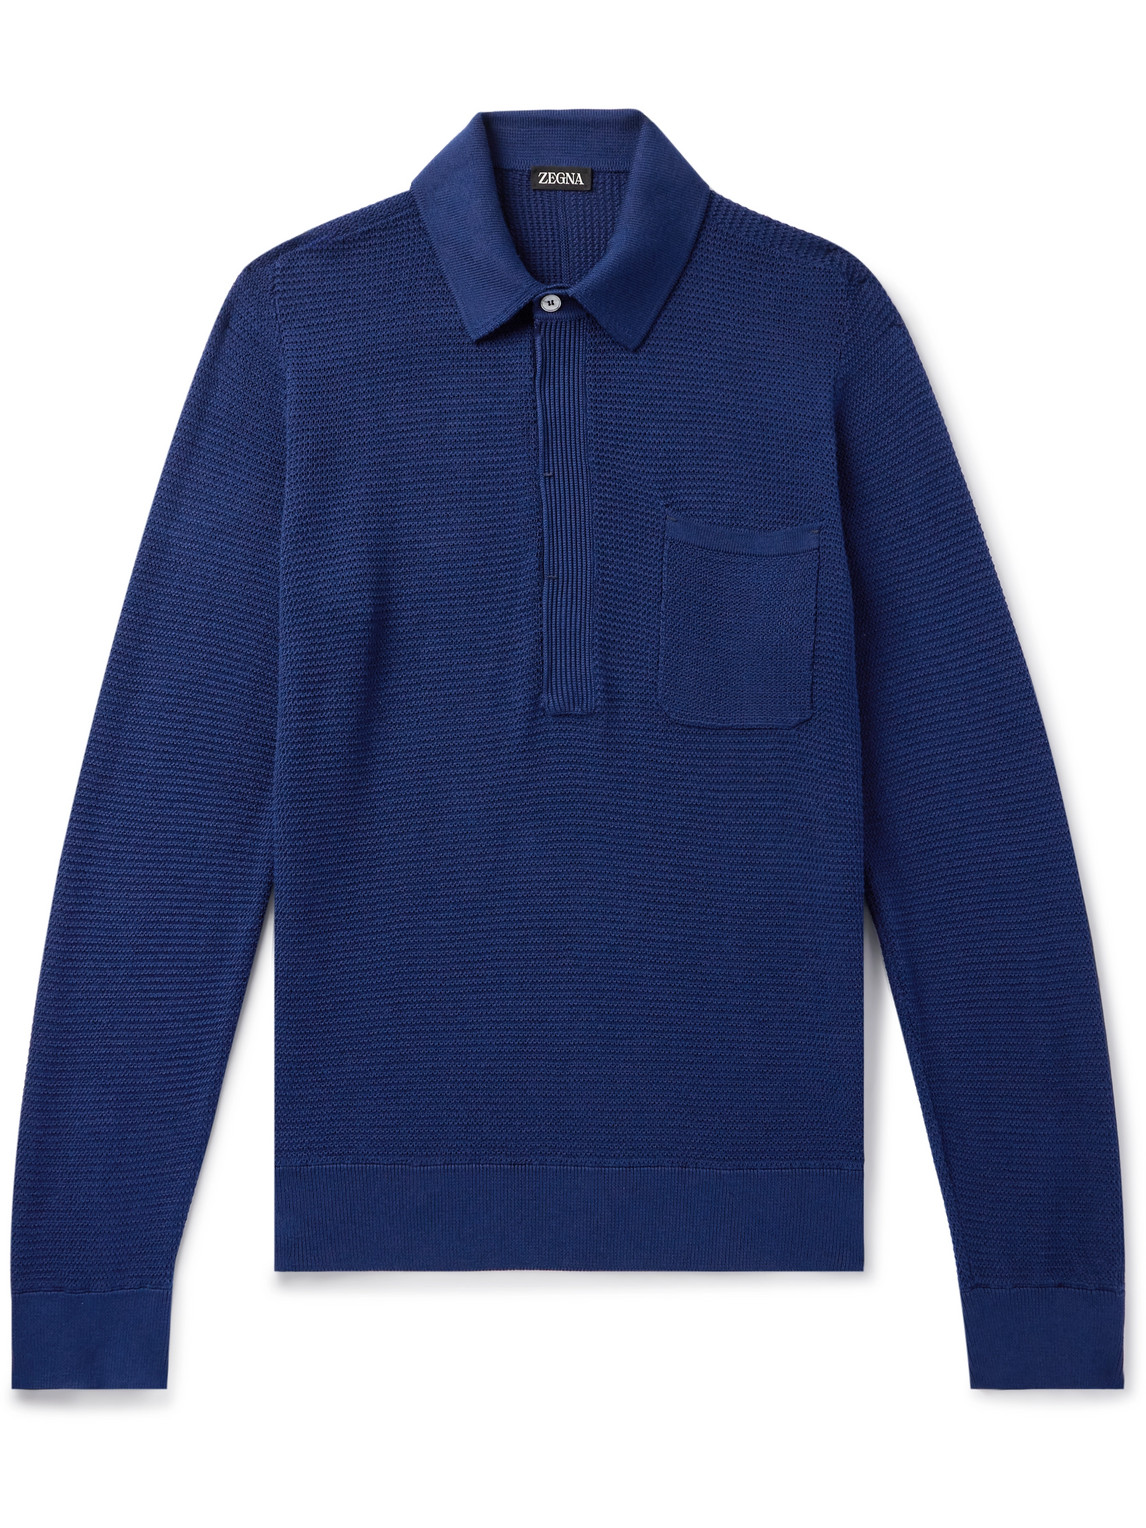 Zegna Textured Cotton And Mulberry Silk-blend Polo Shirt In Utility Blue Mélange